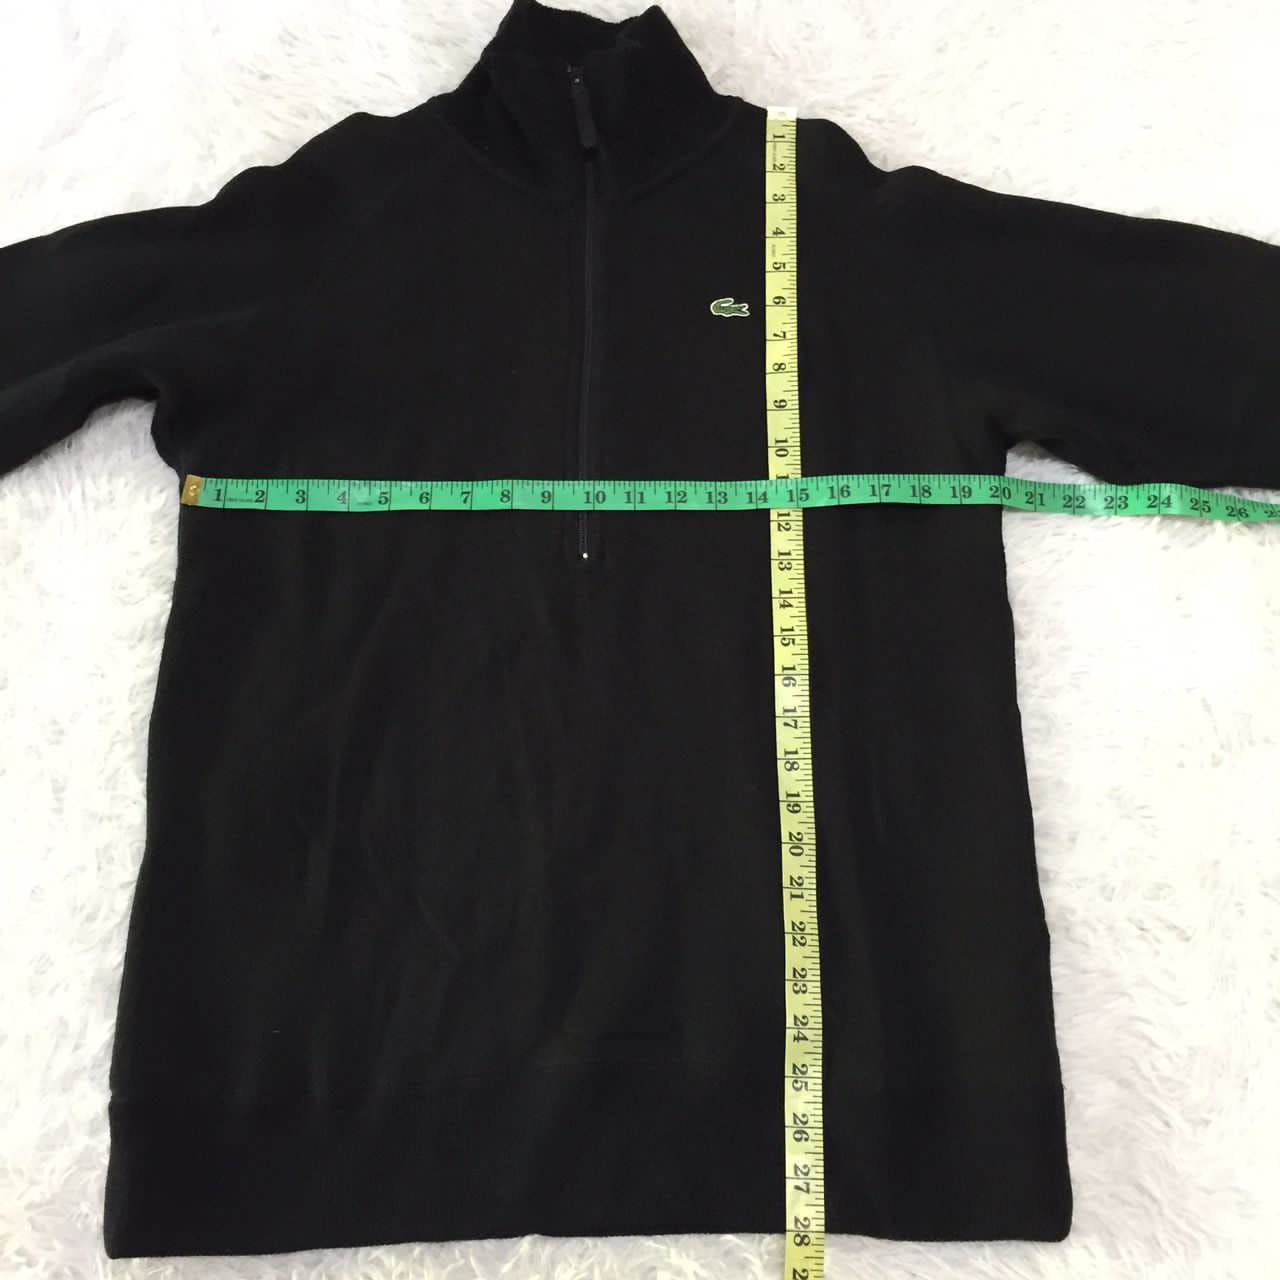 Lacoste sweater jacket made in Japan - 3